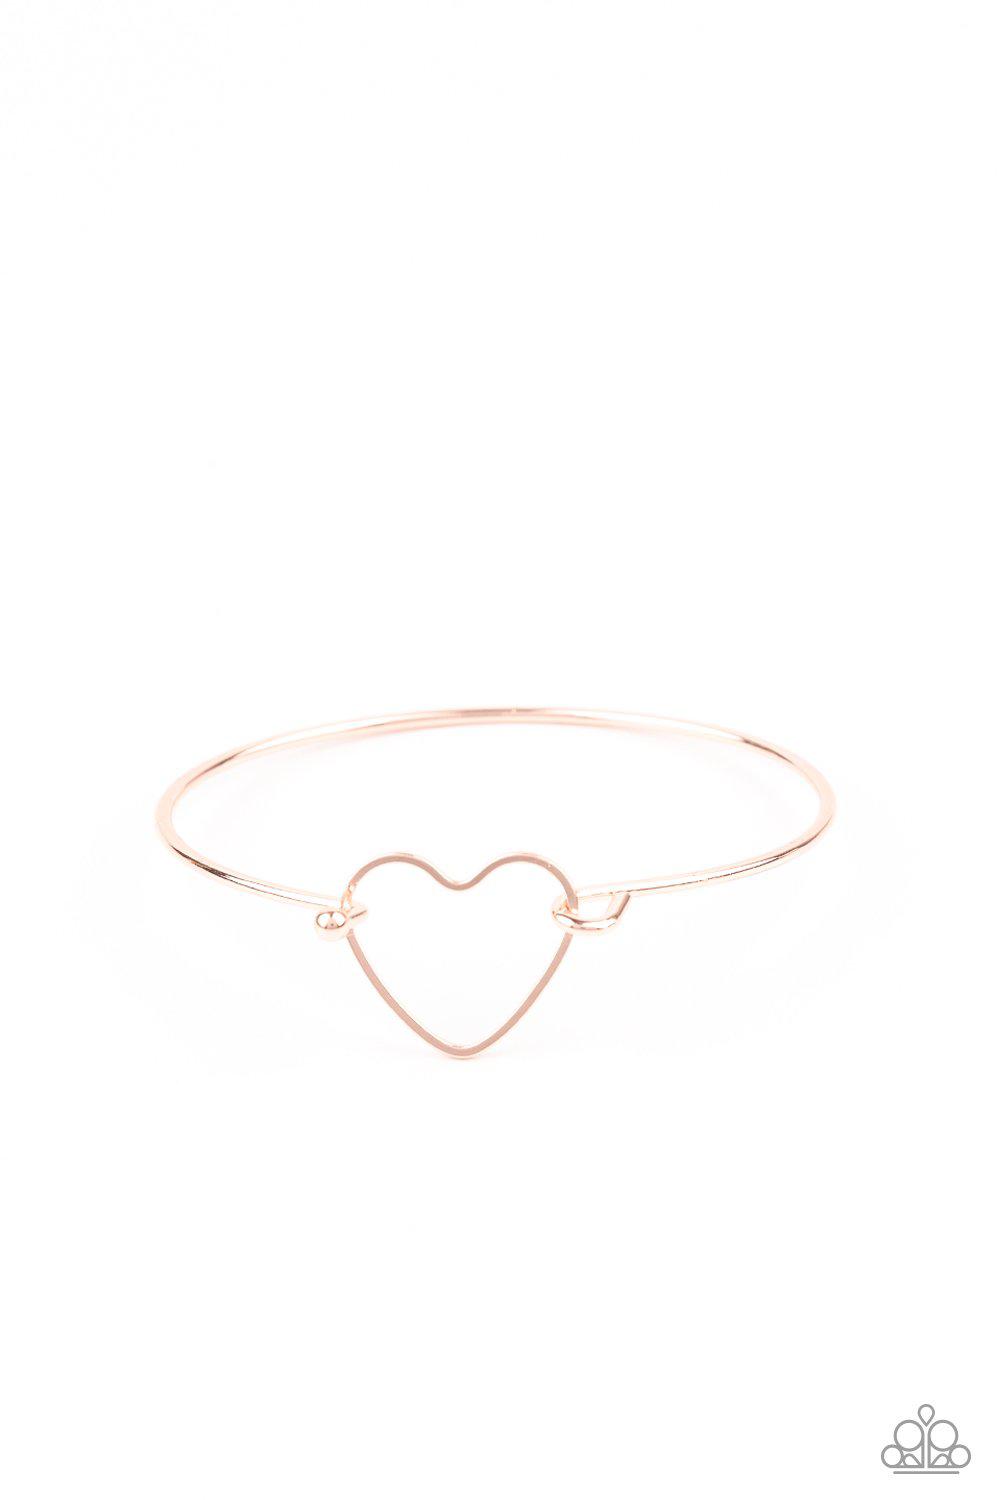 Make Yourself HEART Rose Gold Heart Bracelet - Paparazzi Accessories - lightbox -CarasShop.com - $5 Jewelry by Cara Jewels